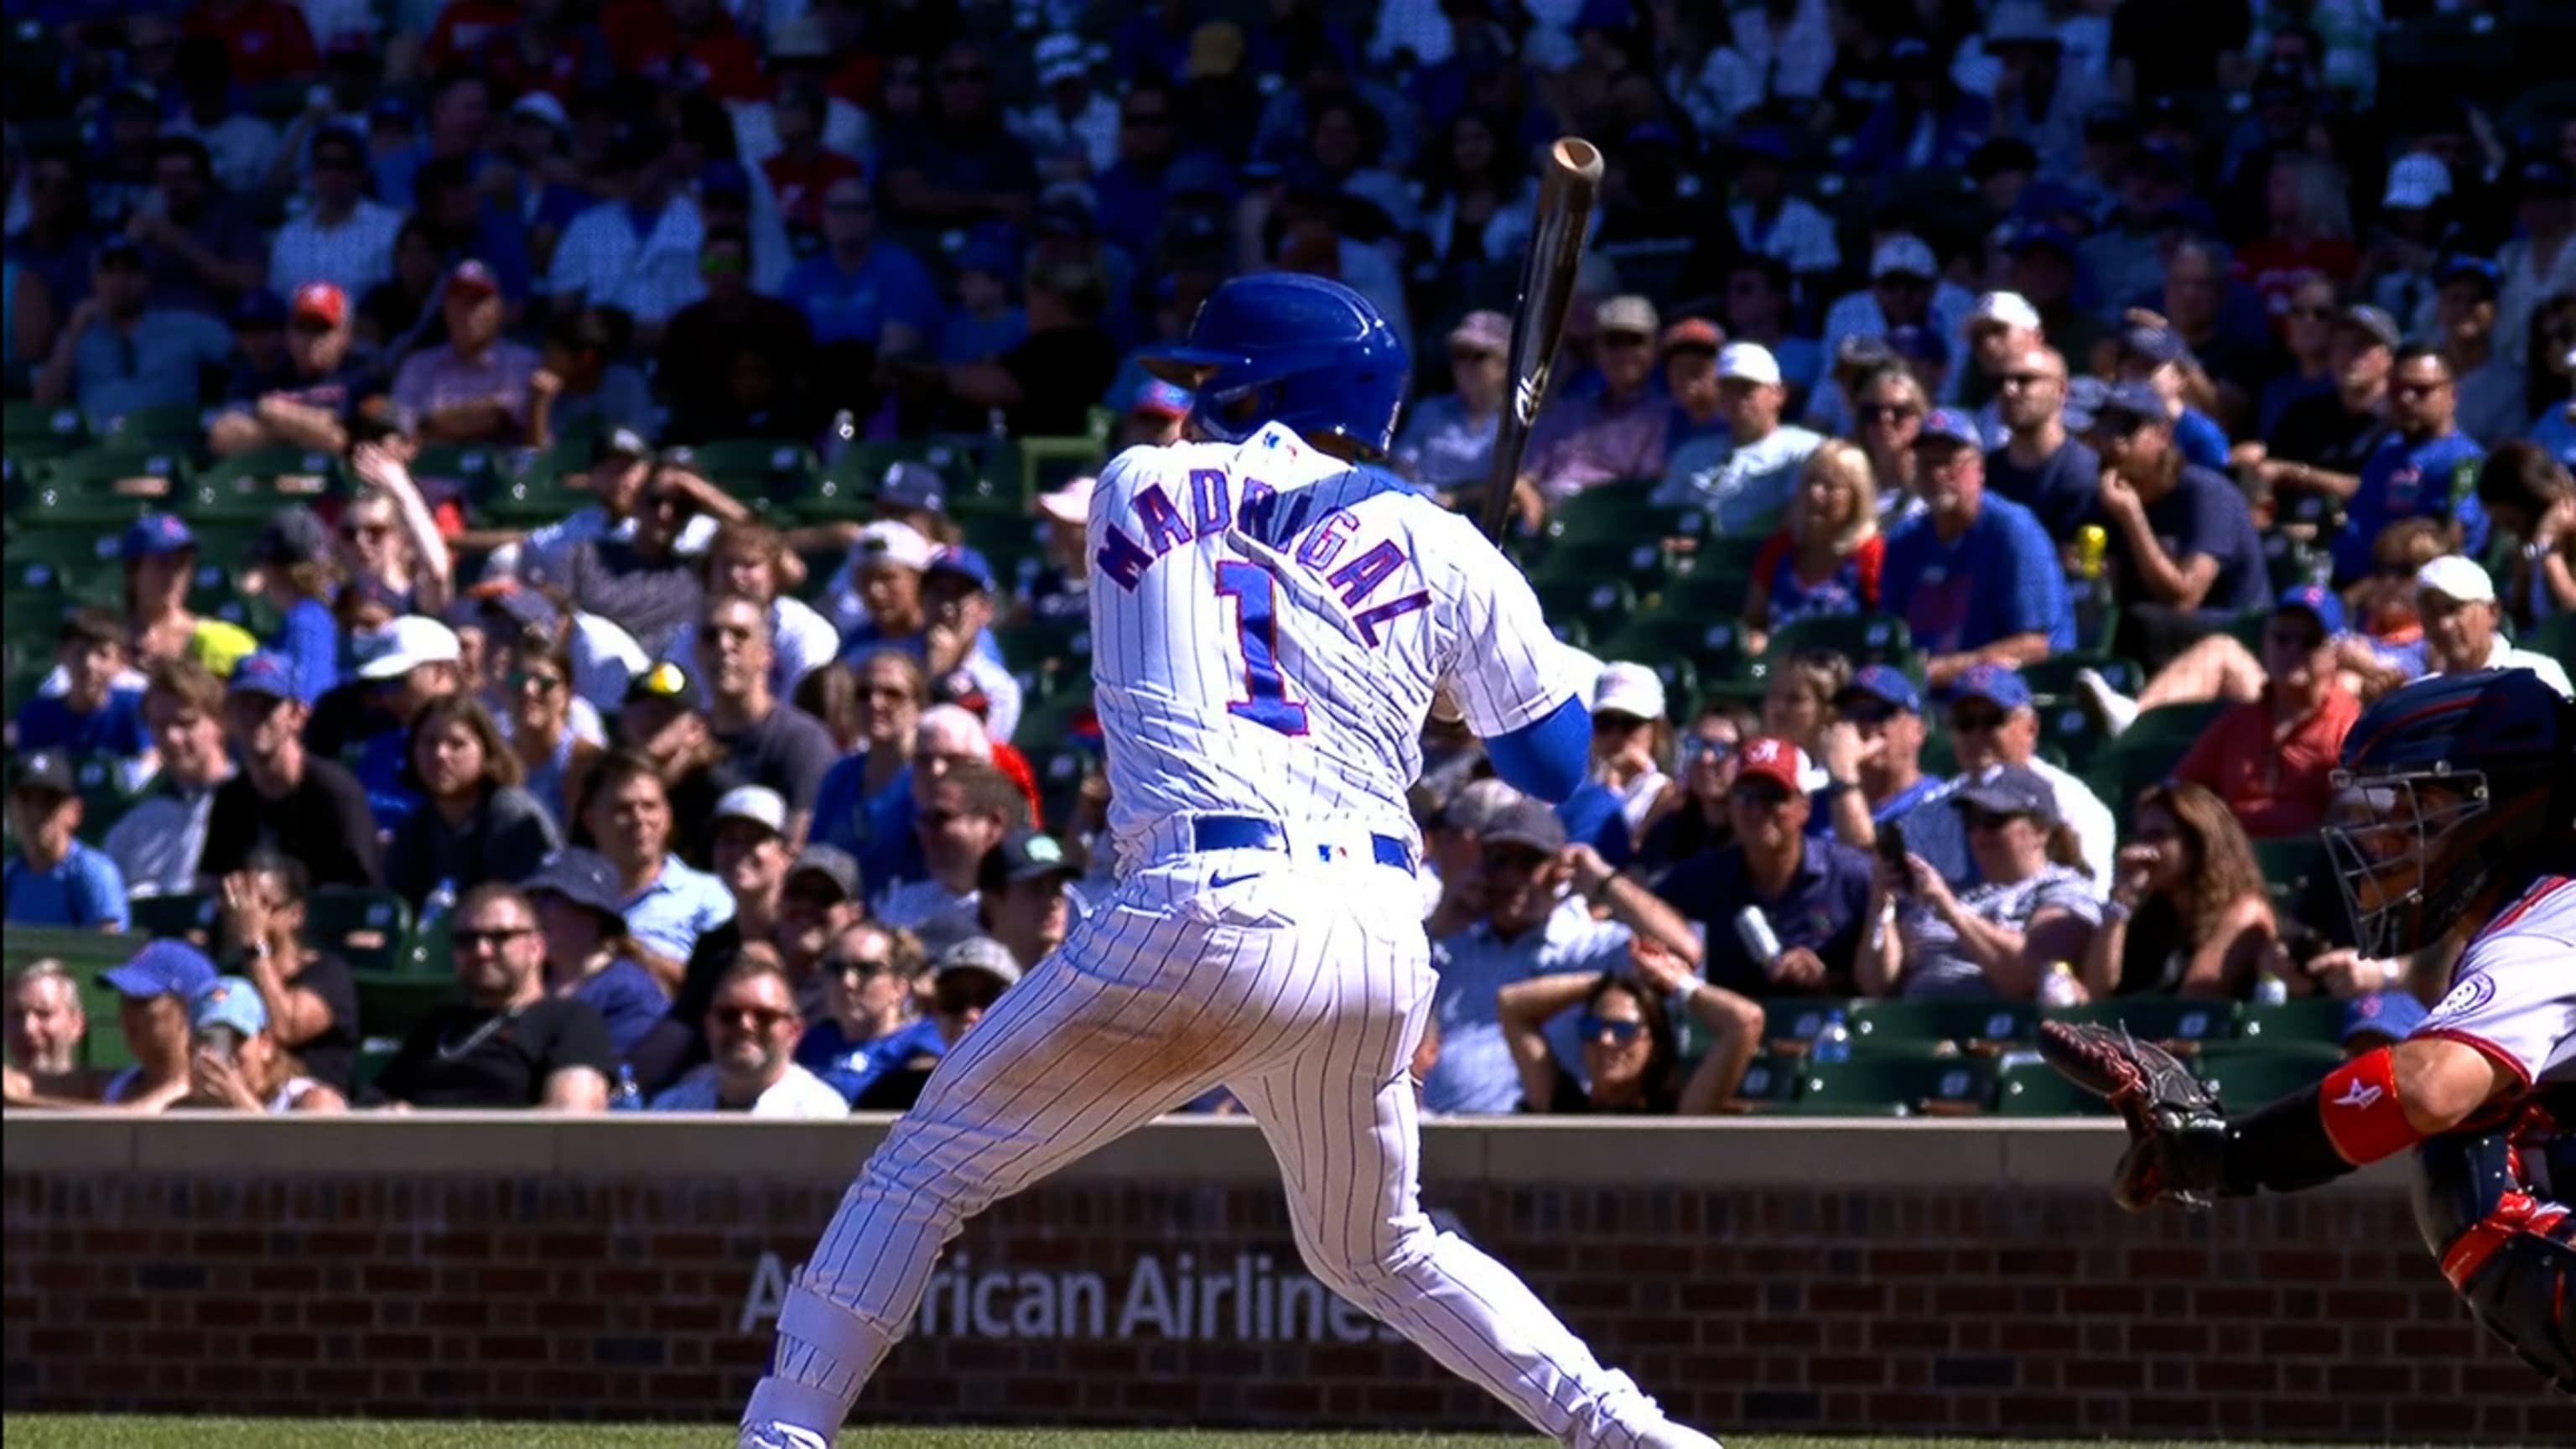 Cubs score 6 runs late to rally for 7-4 win over Yankees – NBC